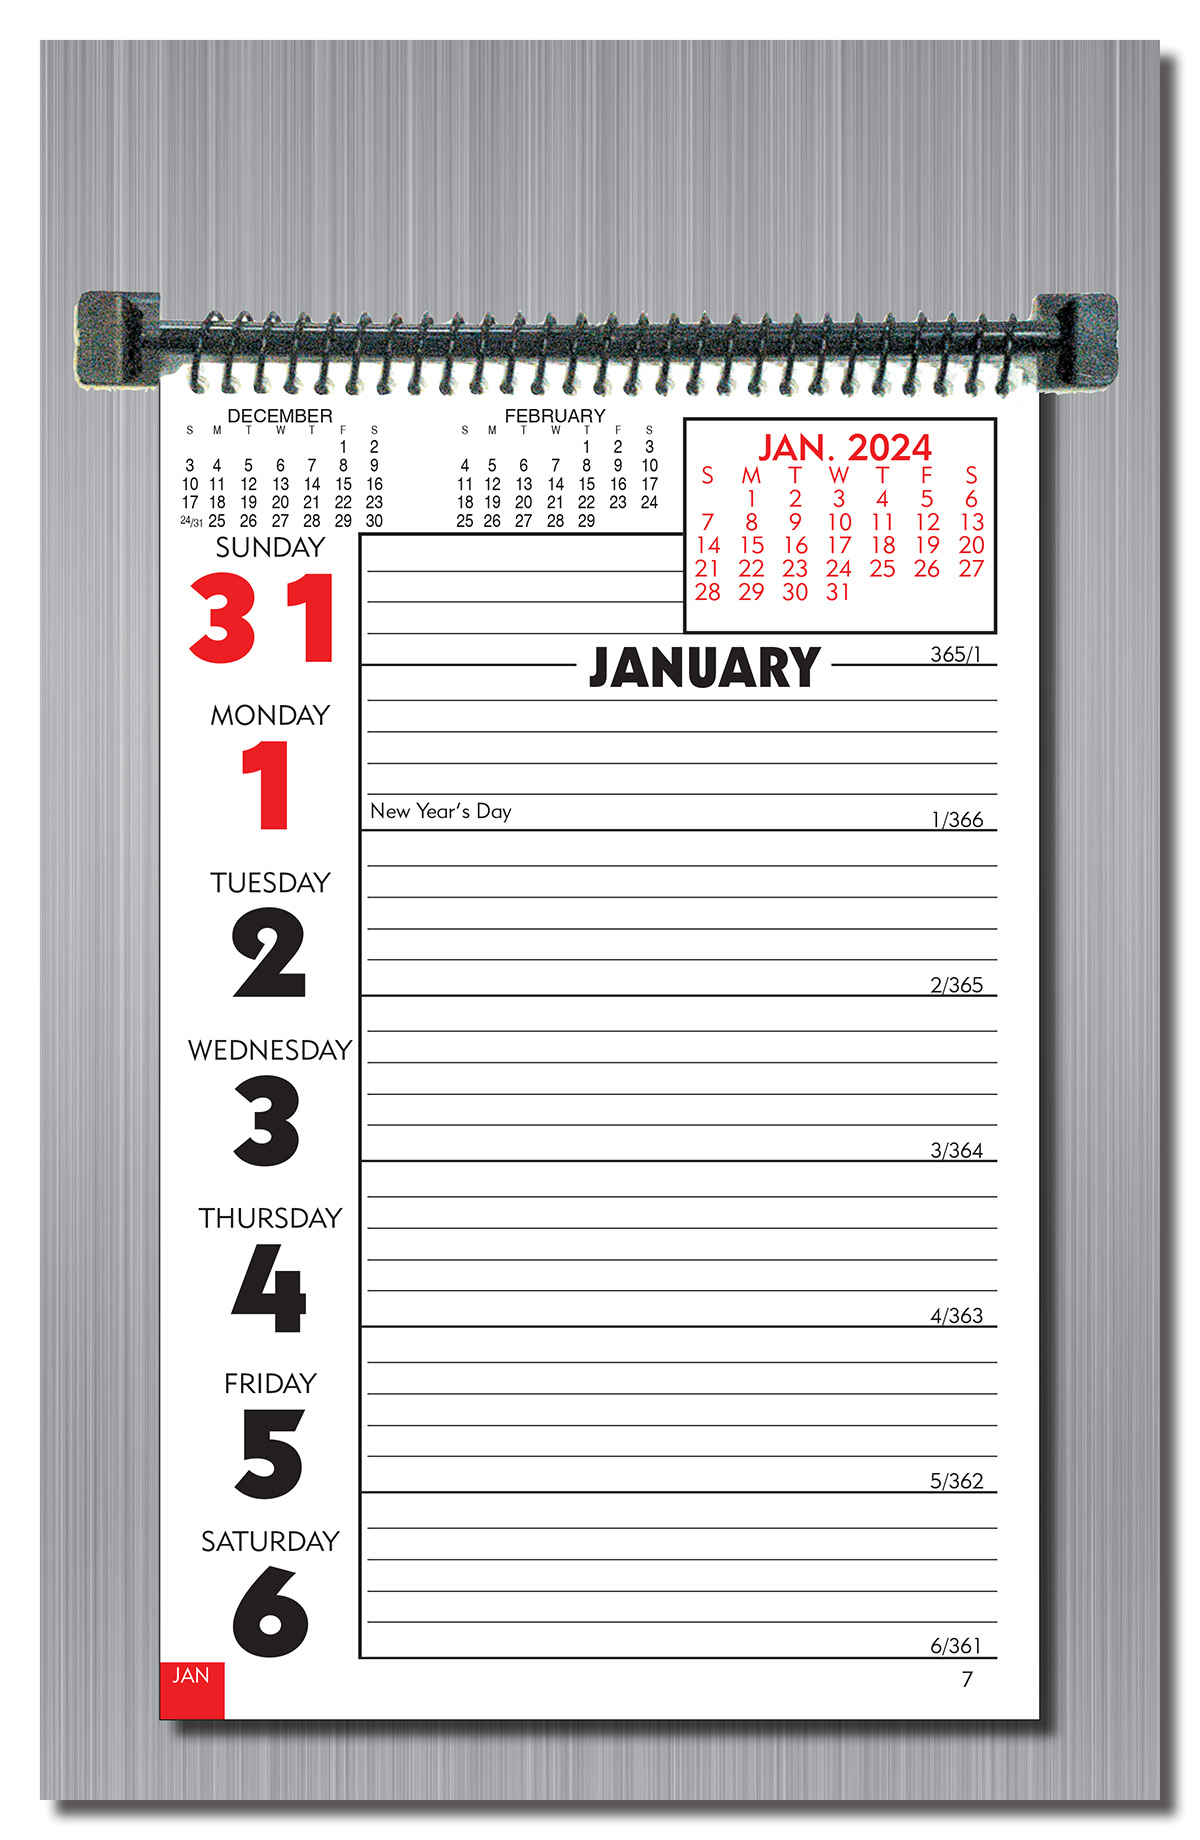 Weekly Planning Wall Calendar with Memo Space and Almanac Information